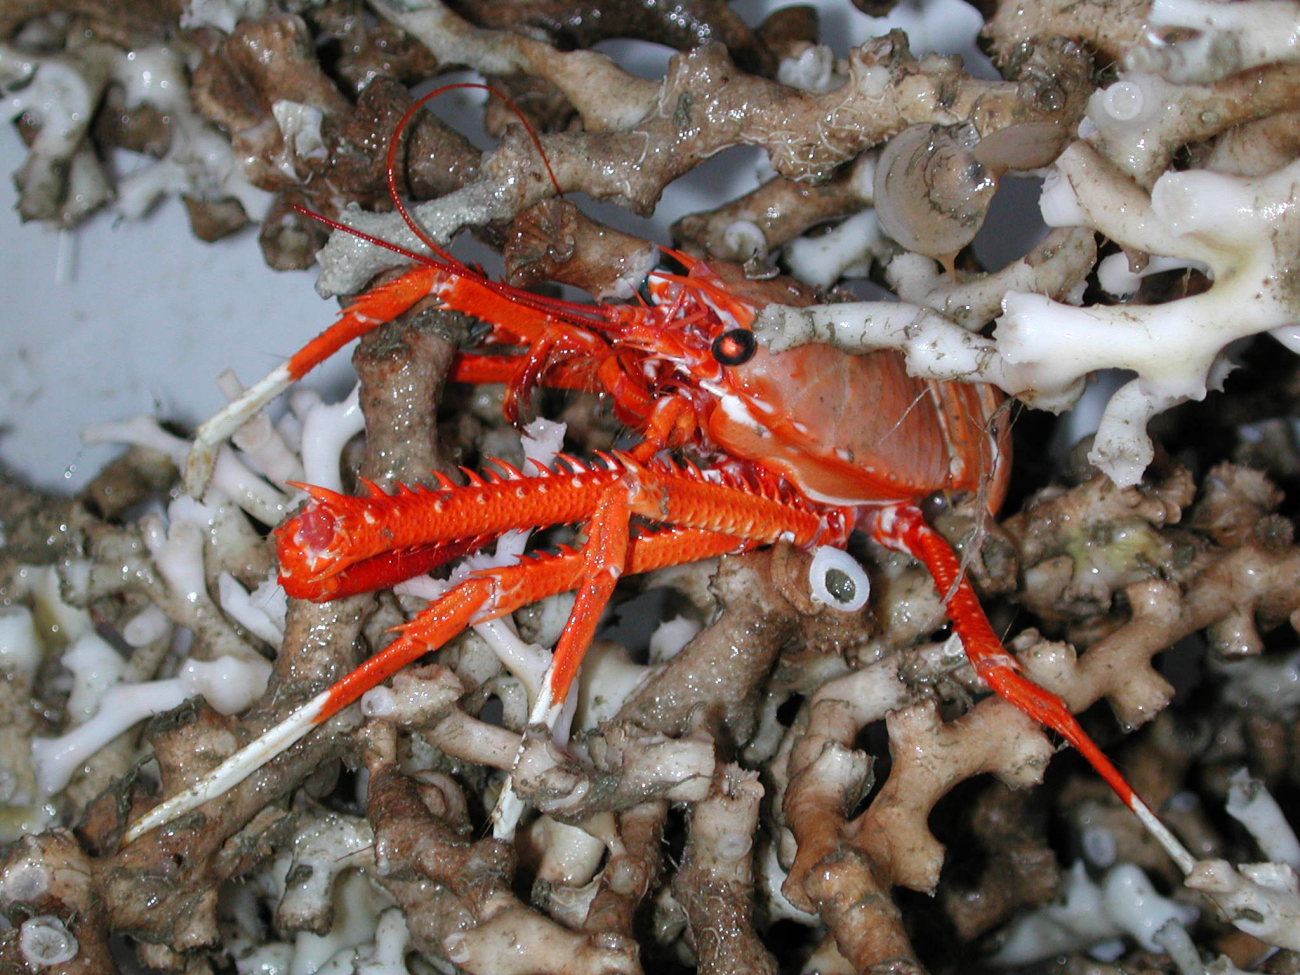 This galatheid crab, commonly known as a squat lobster, was brought aboard theR/V SEWARD JOHNSON